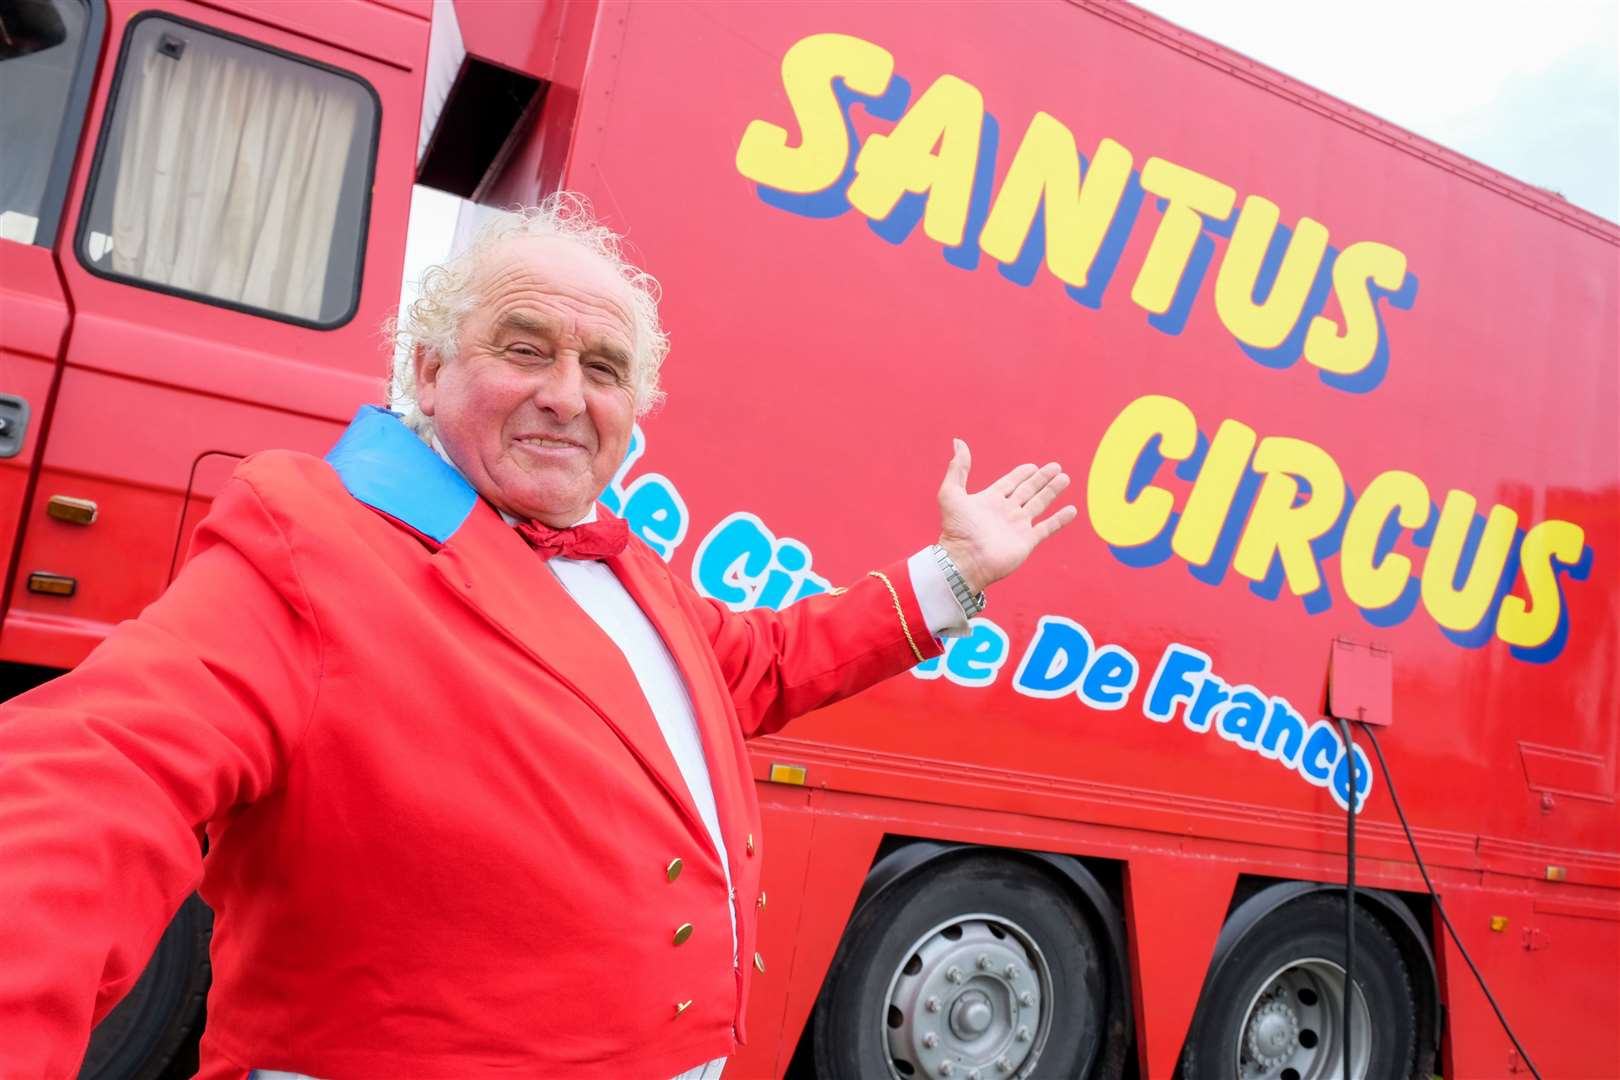 Santus Circus setting up at Barton's Point Coastal Park, Sheerness with ringmaster Ernest Santus. Picture by: Matthew Walker